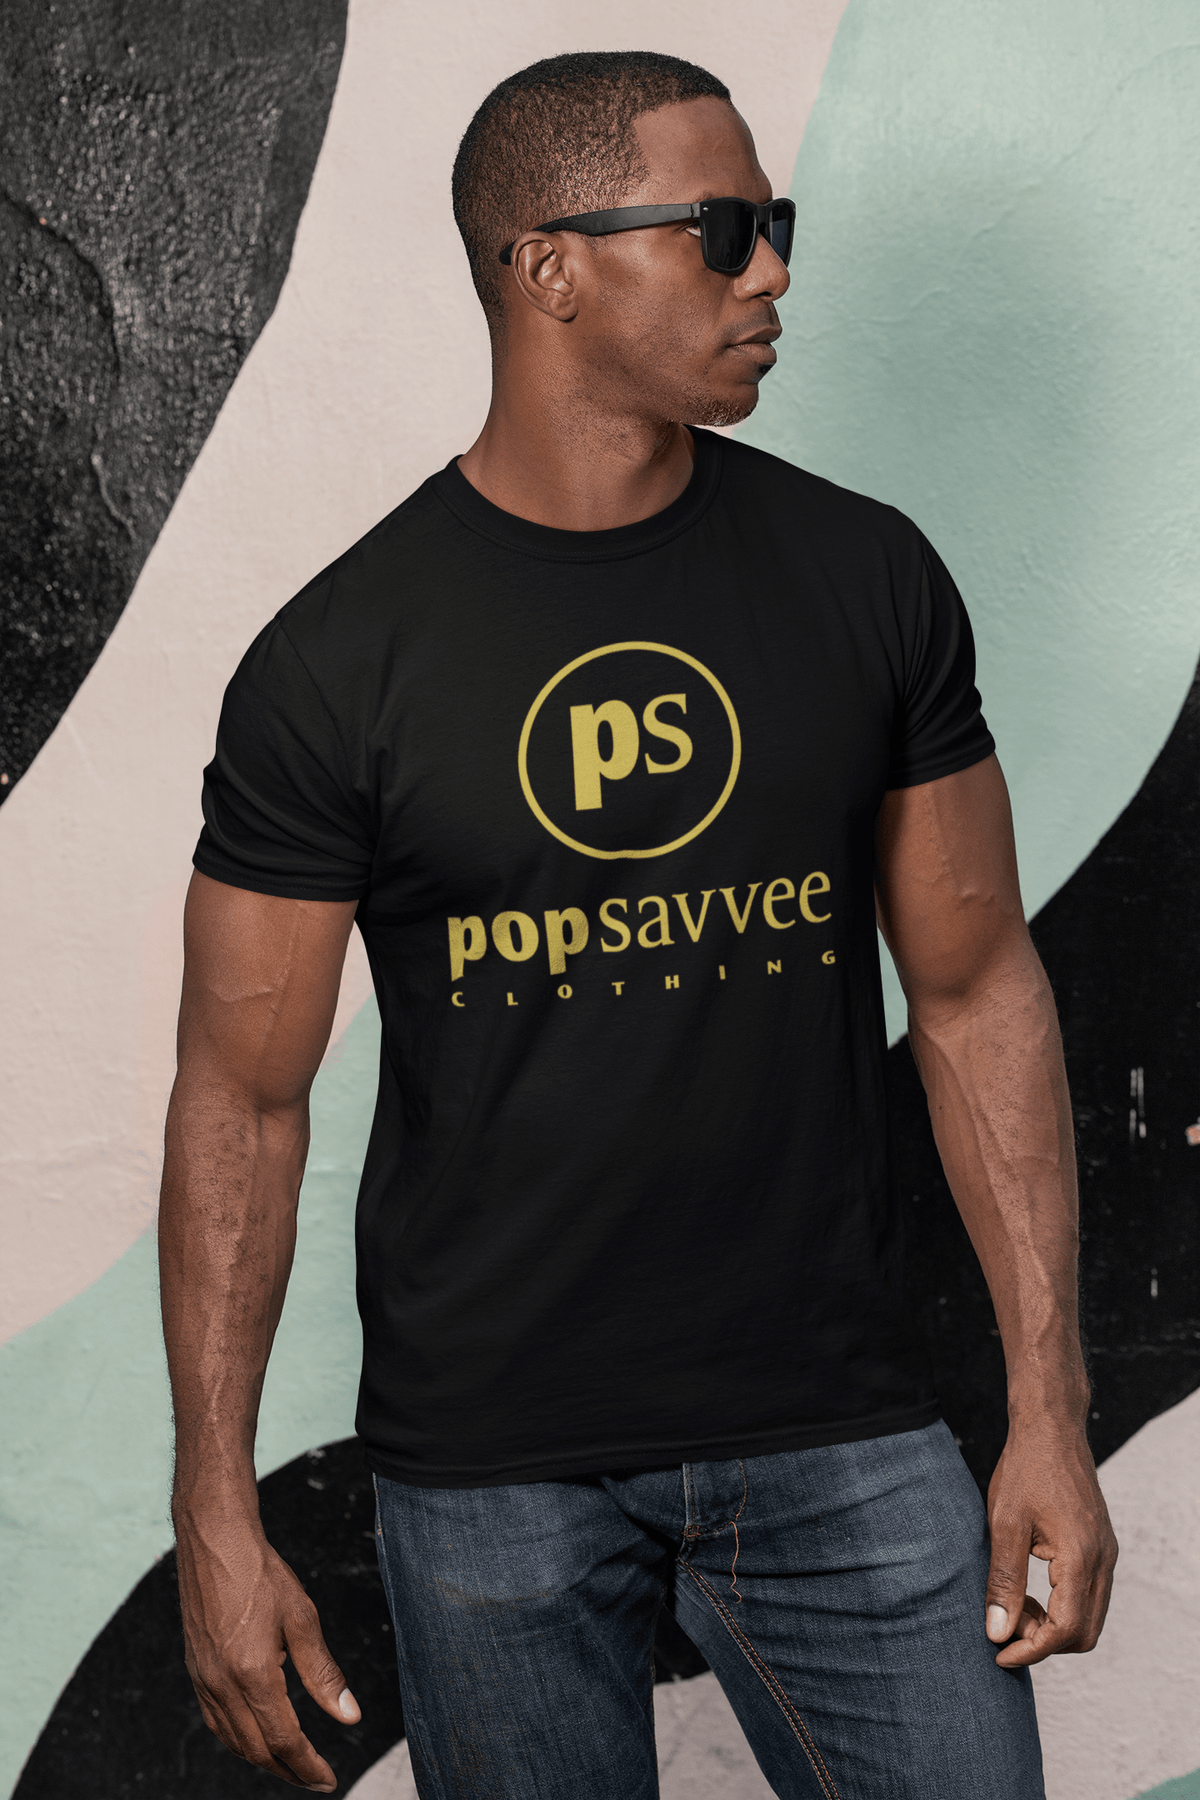 GOLD LABEL COLLECTION - Pop Savvee Clothing